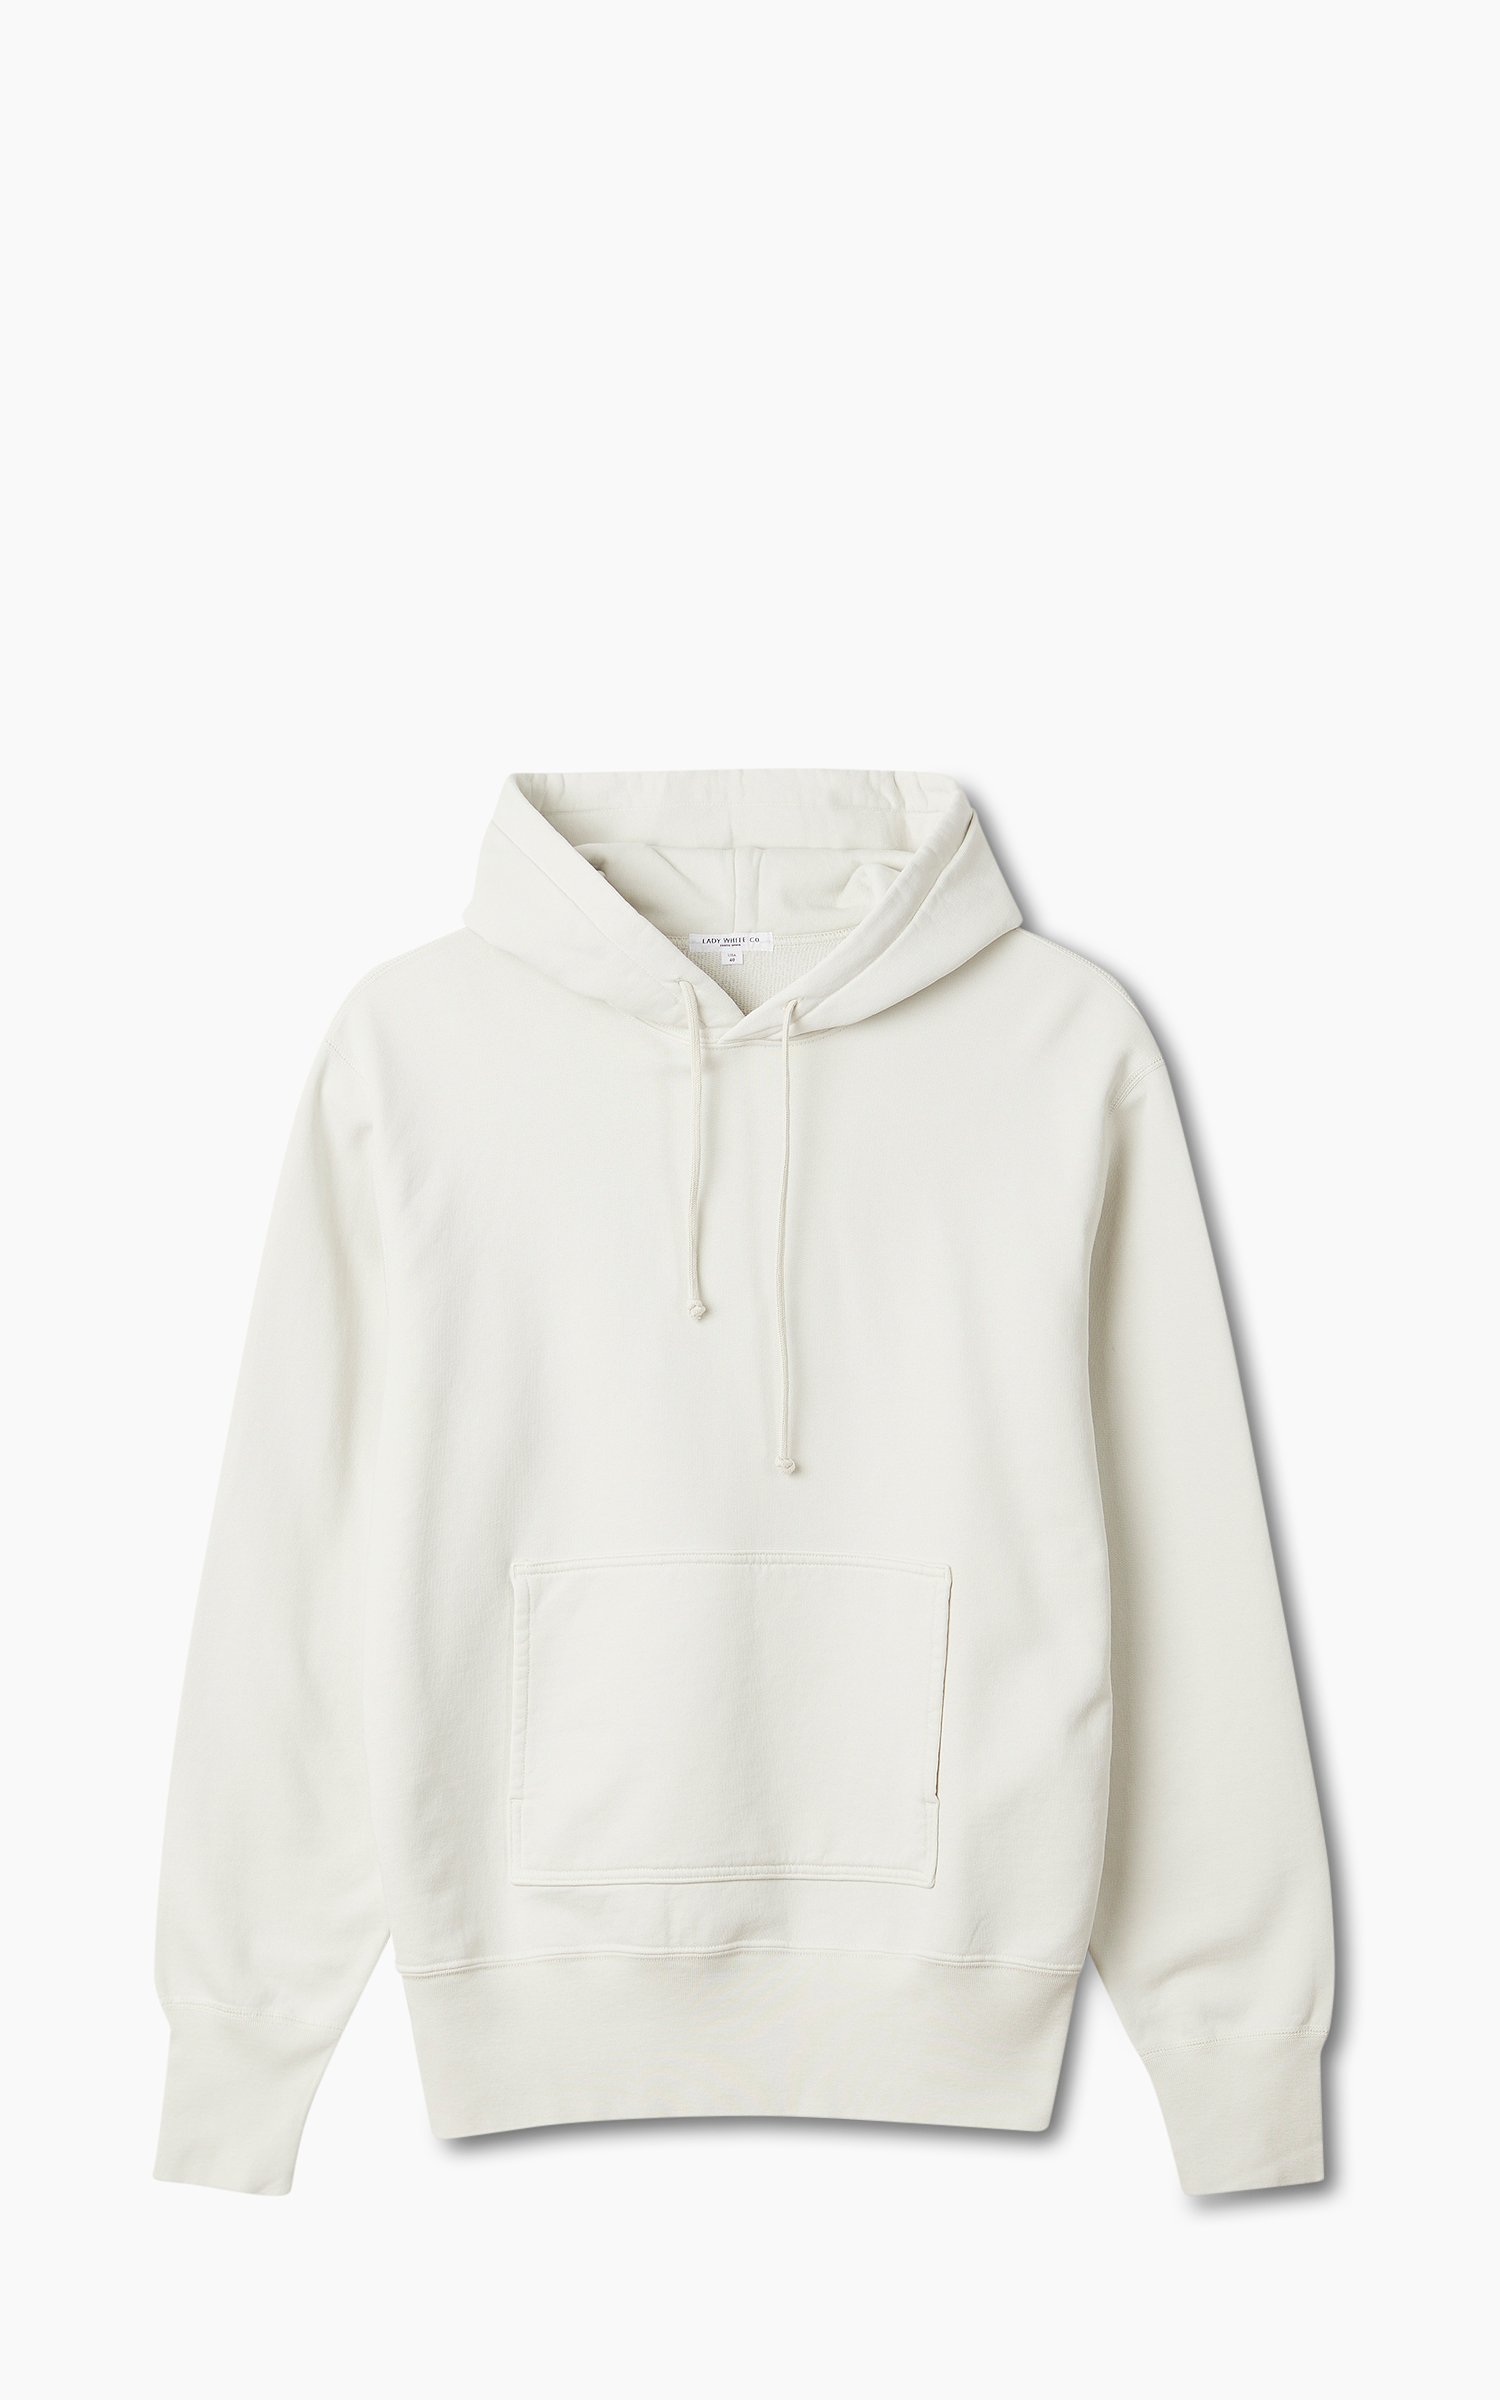 Lady White Co. LWC Hoodie